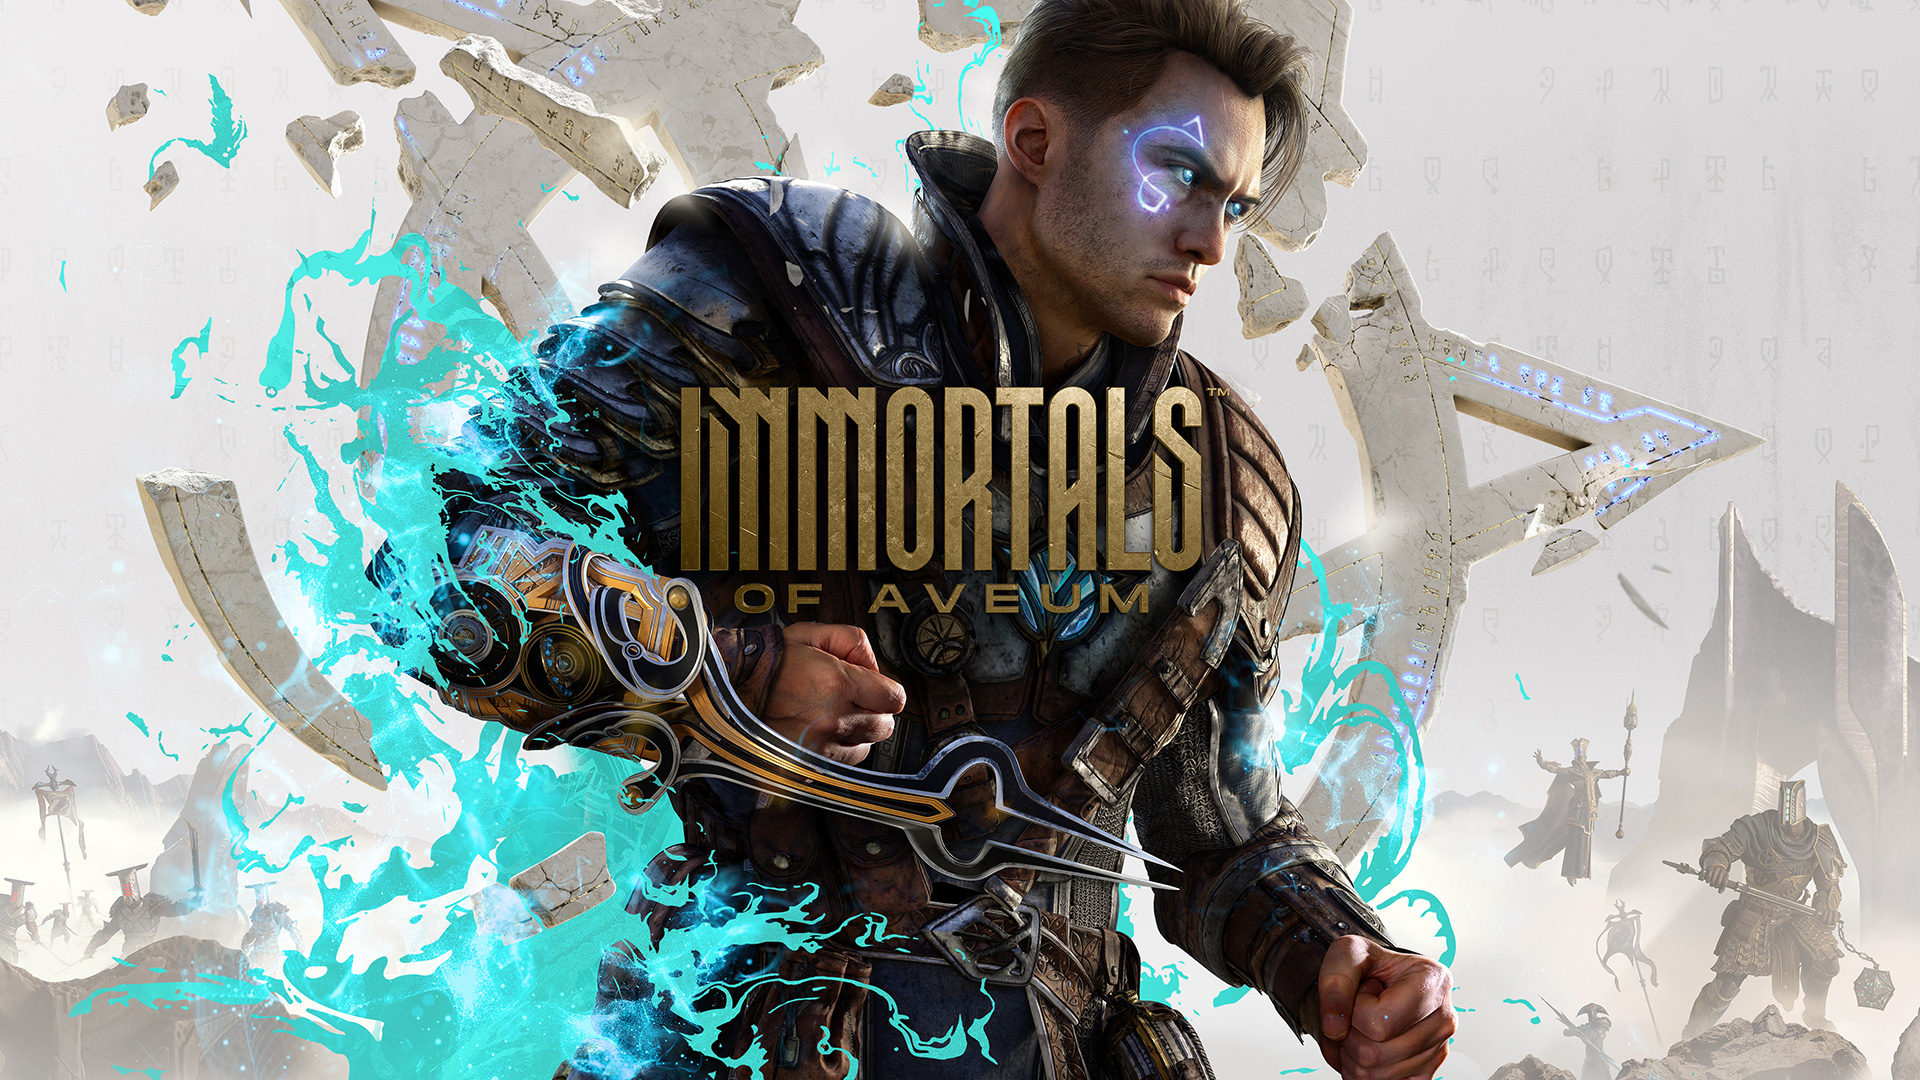 Immortals Of Aveum Arrives Today, Combining a Cinematic Single–Player Story With Spellbinding FPS Combat